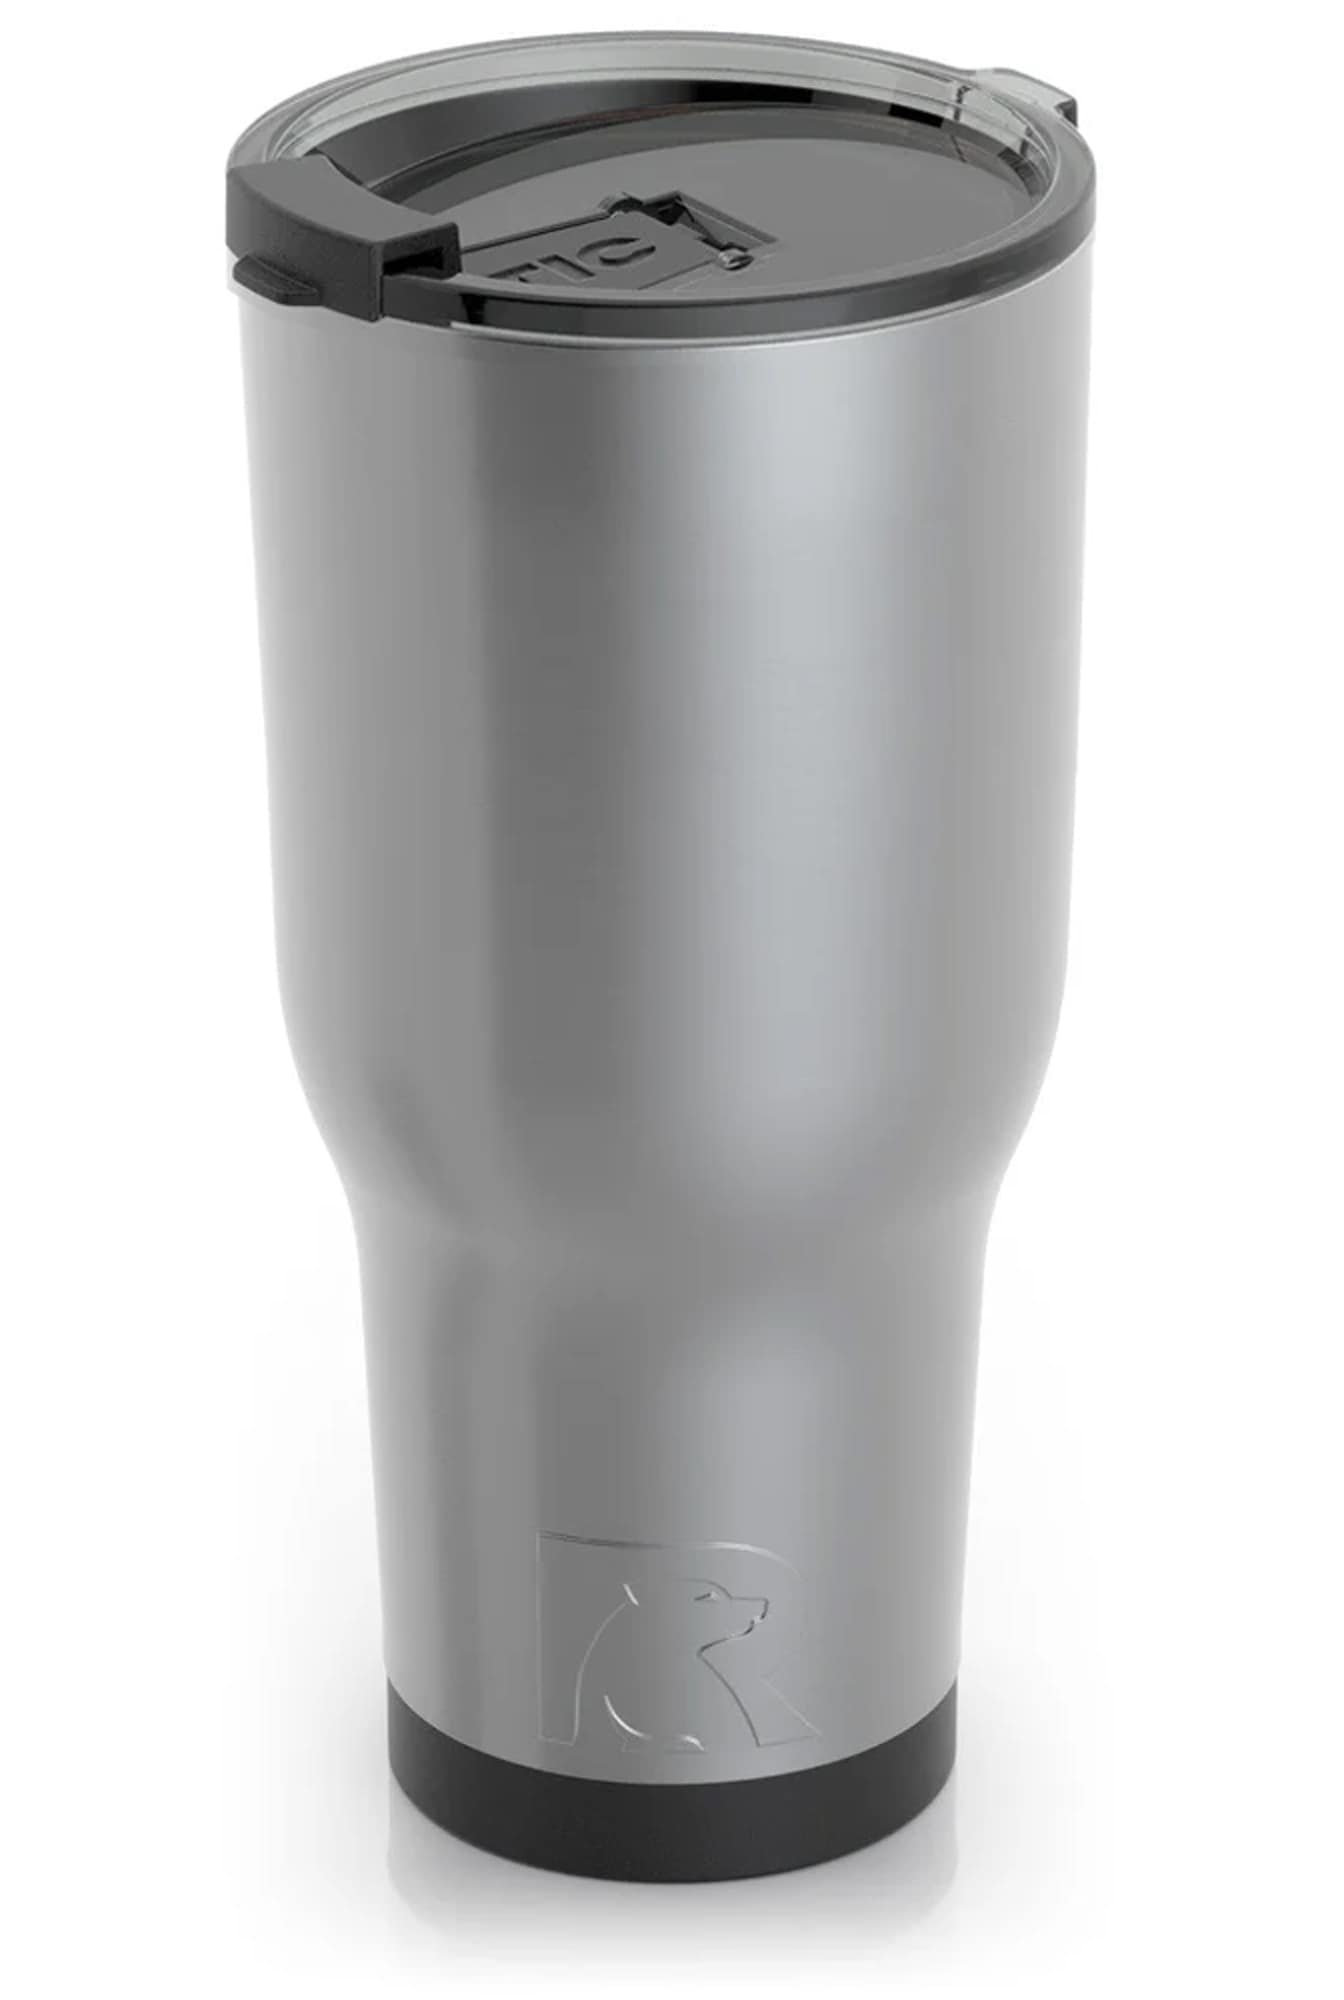 RTIC 20 oz. Vacuum Insulated Stainless Steel Tumbler - Matte Graphite, Silver